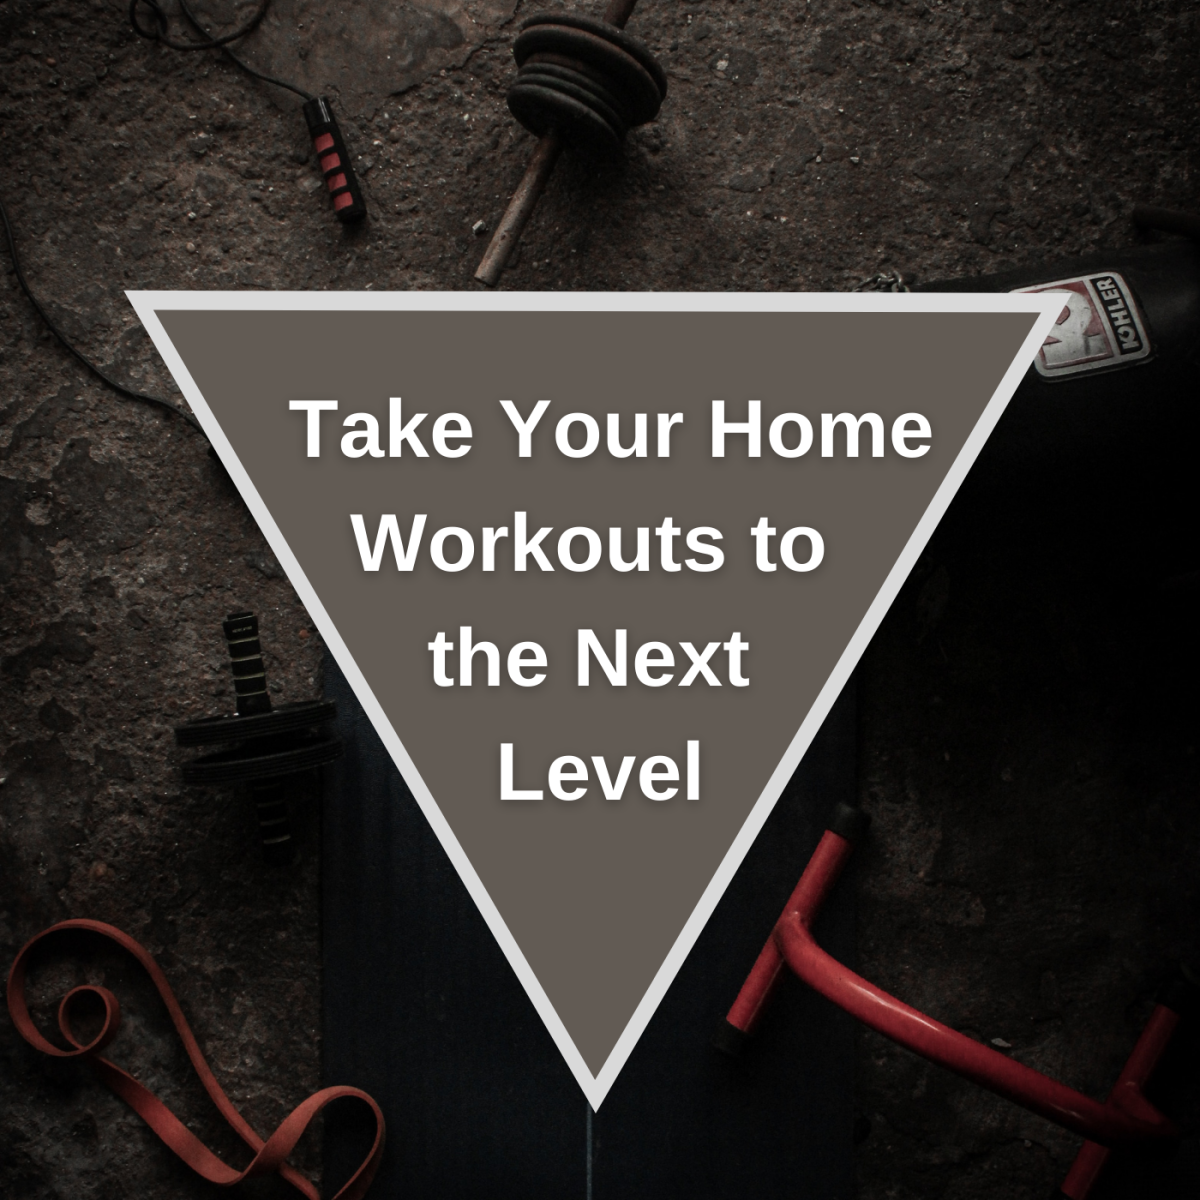 Taking Your Home Workouts to the Next Level: The Bare Essentials